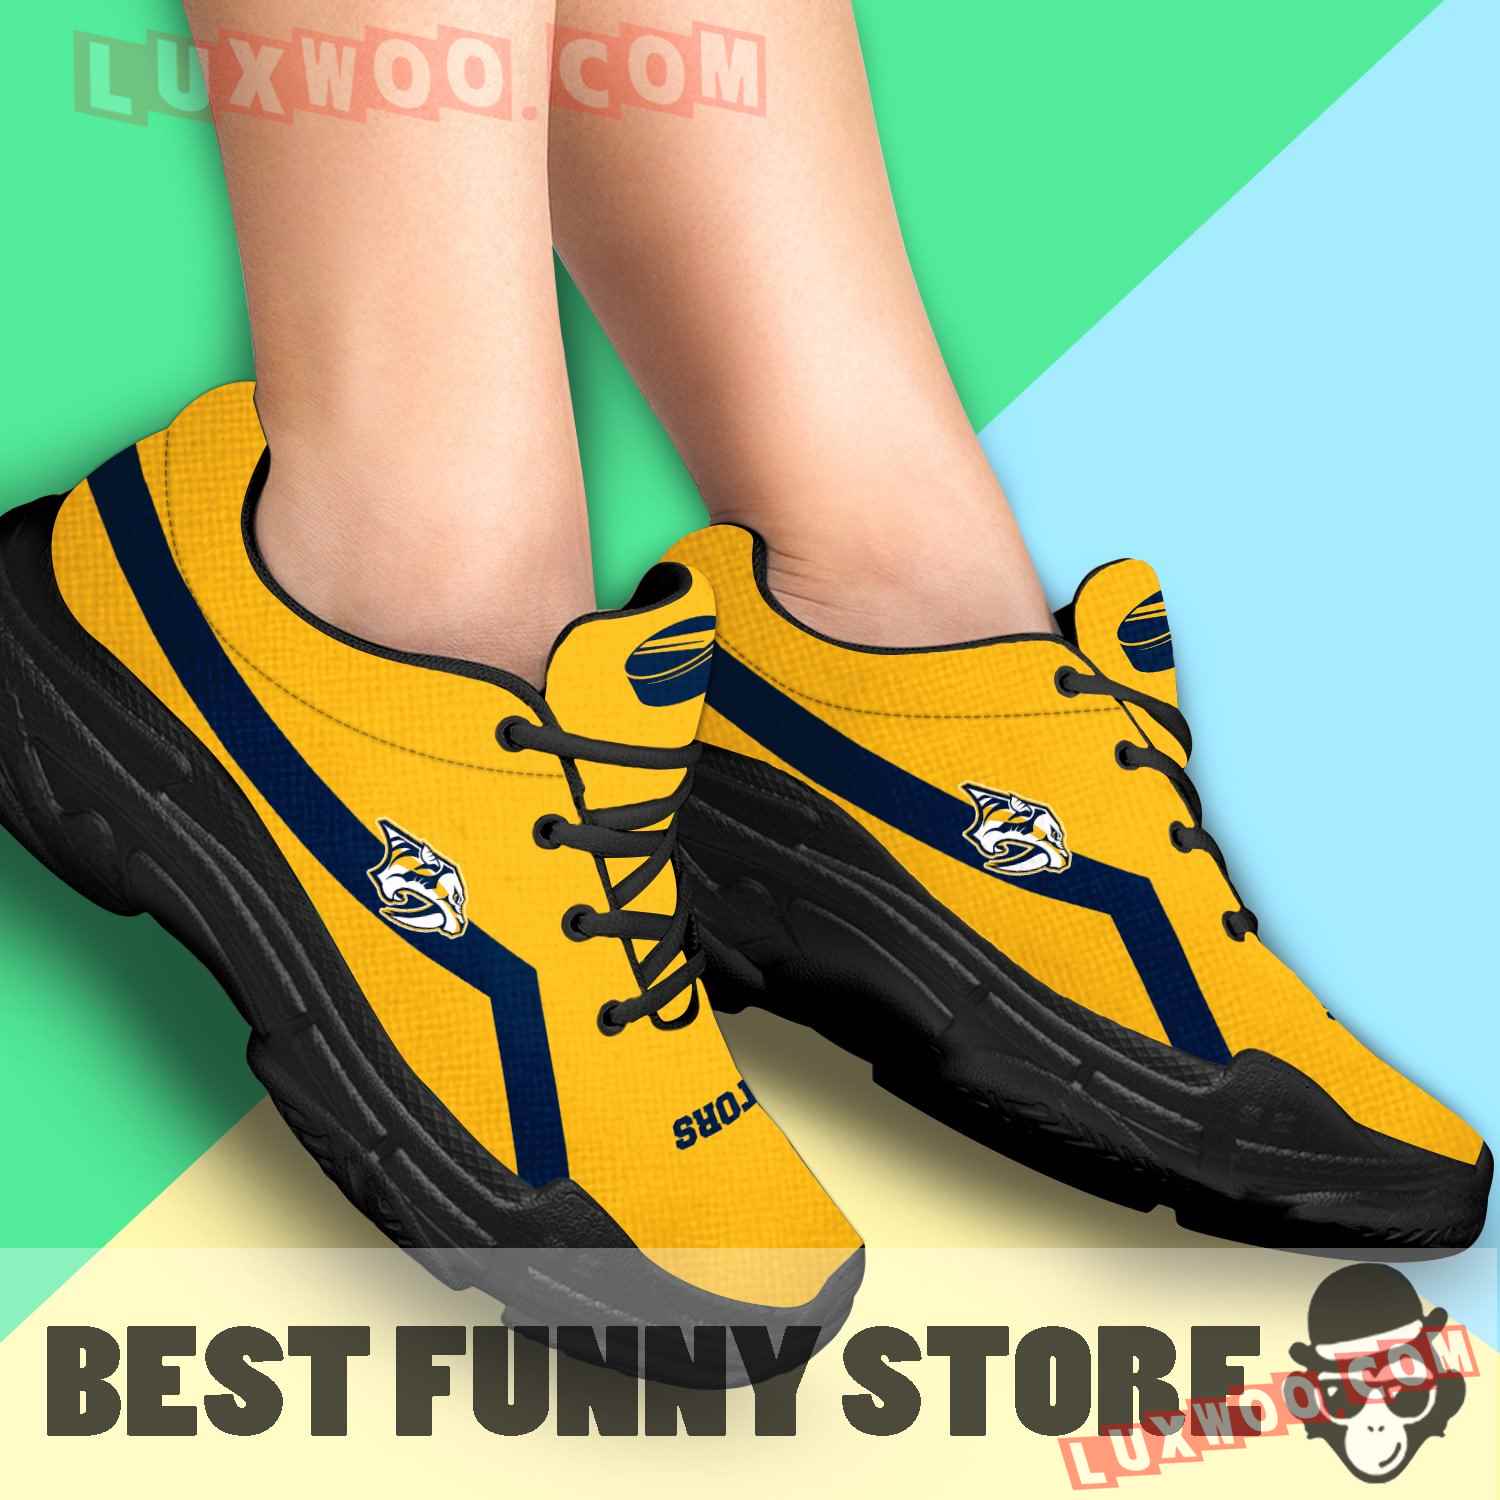 Edition Chunky Sneakers With Line Nashville Predators shoes - Luxwoo.com